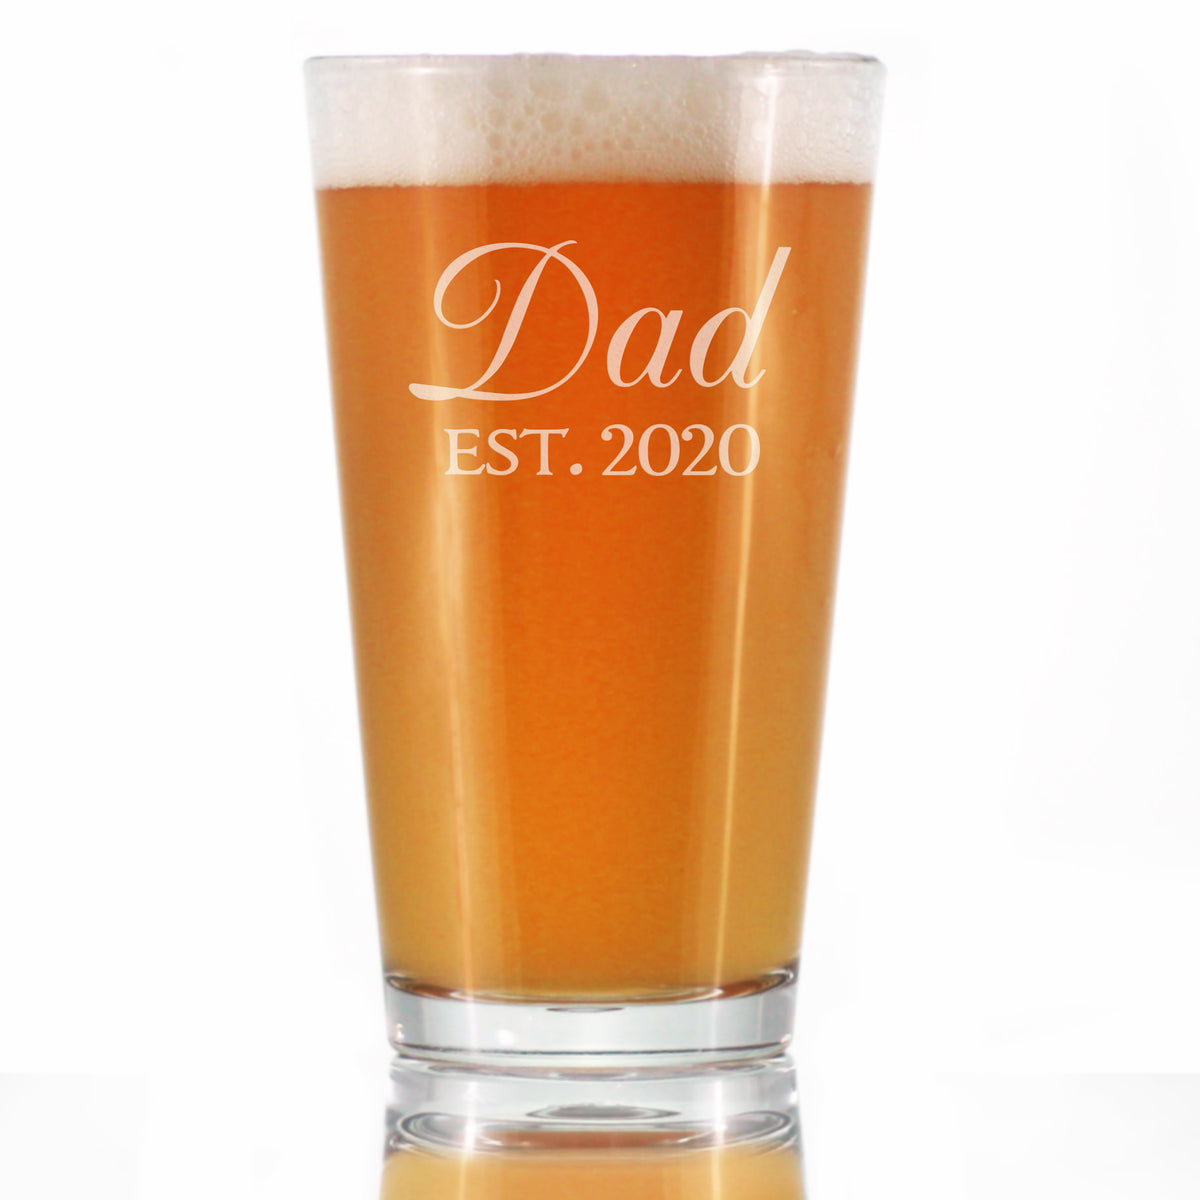 Dad Est 2021 - New Father Pint Glass Gift for First Time Parents - Decorative 16 Oz Glasses